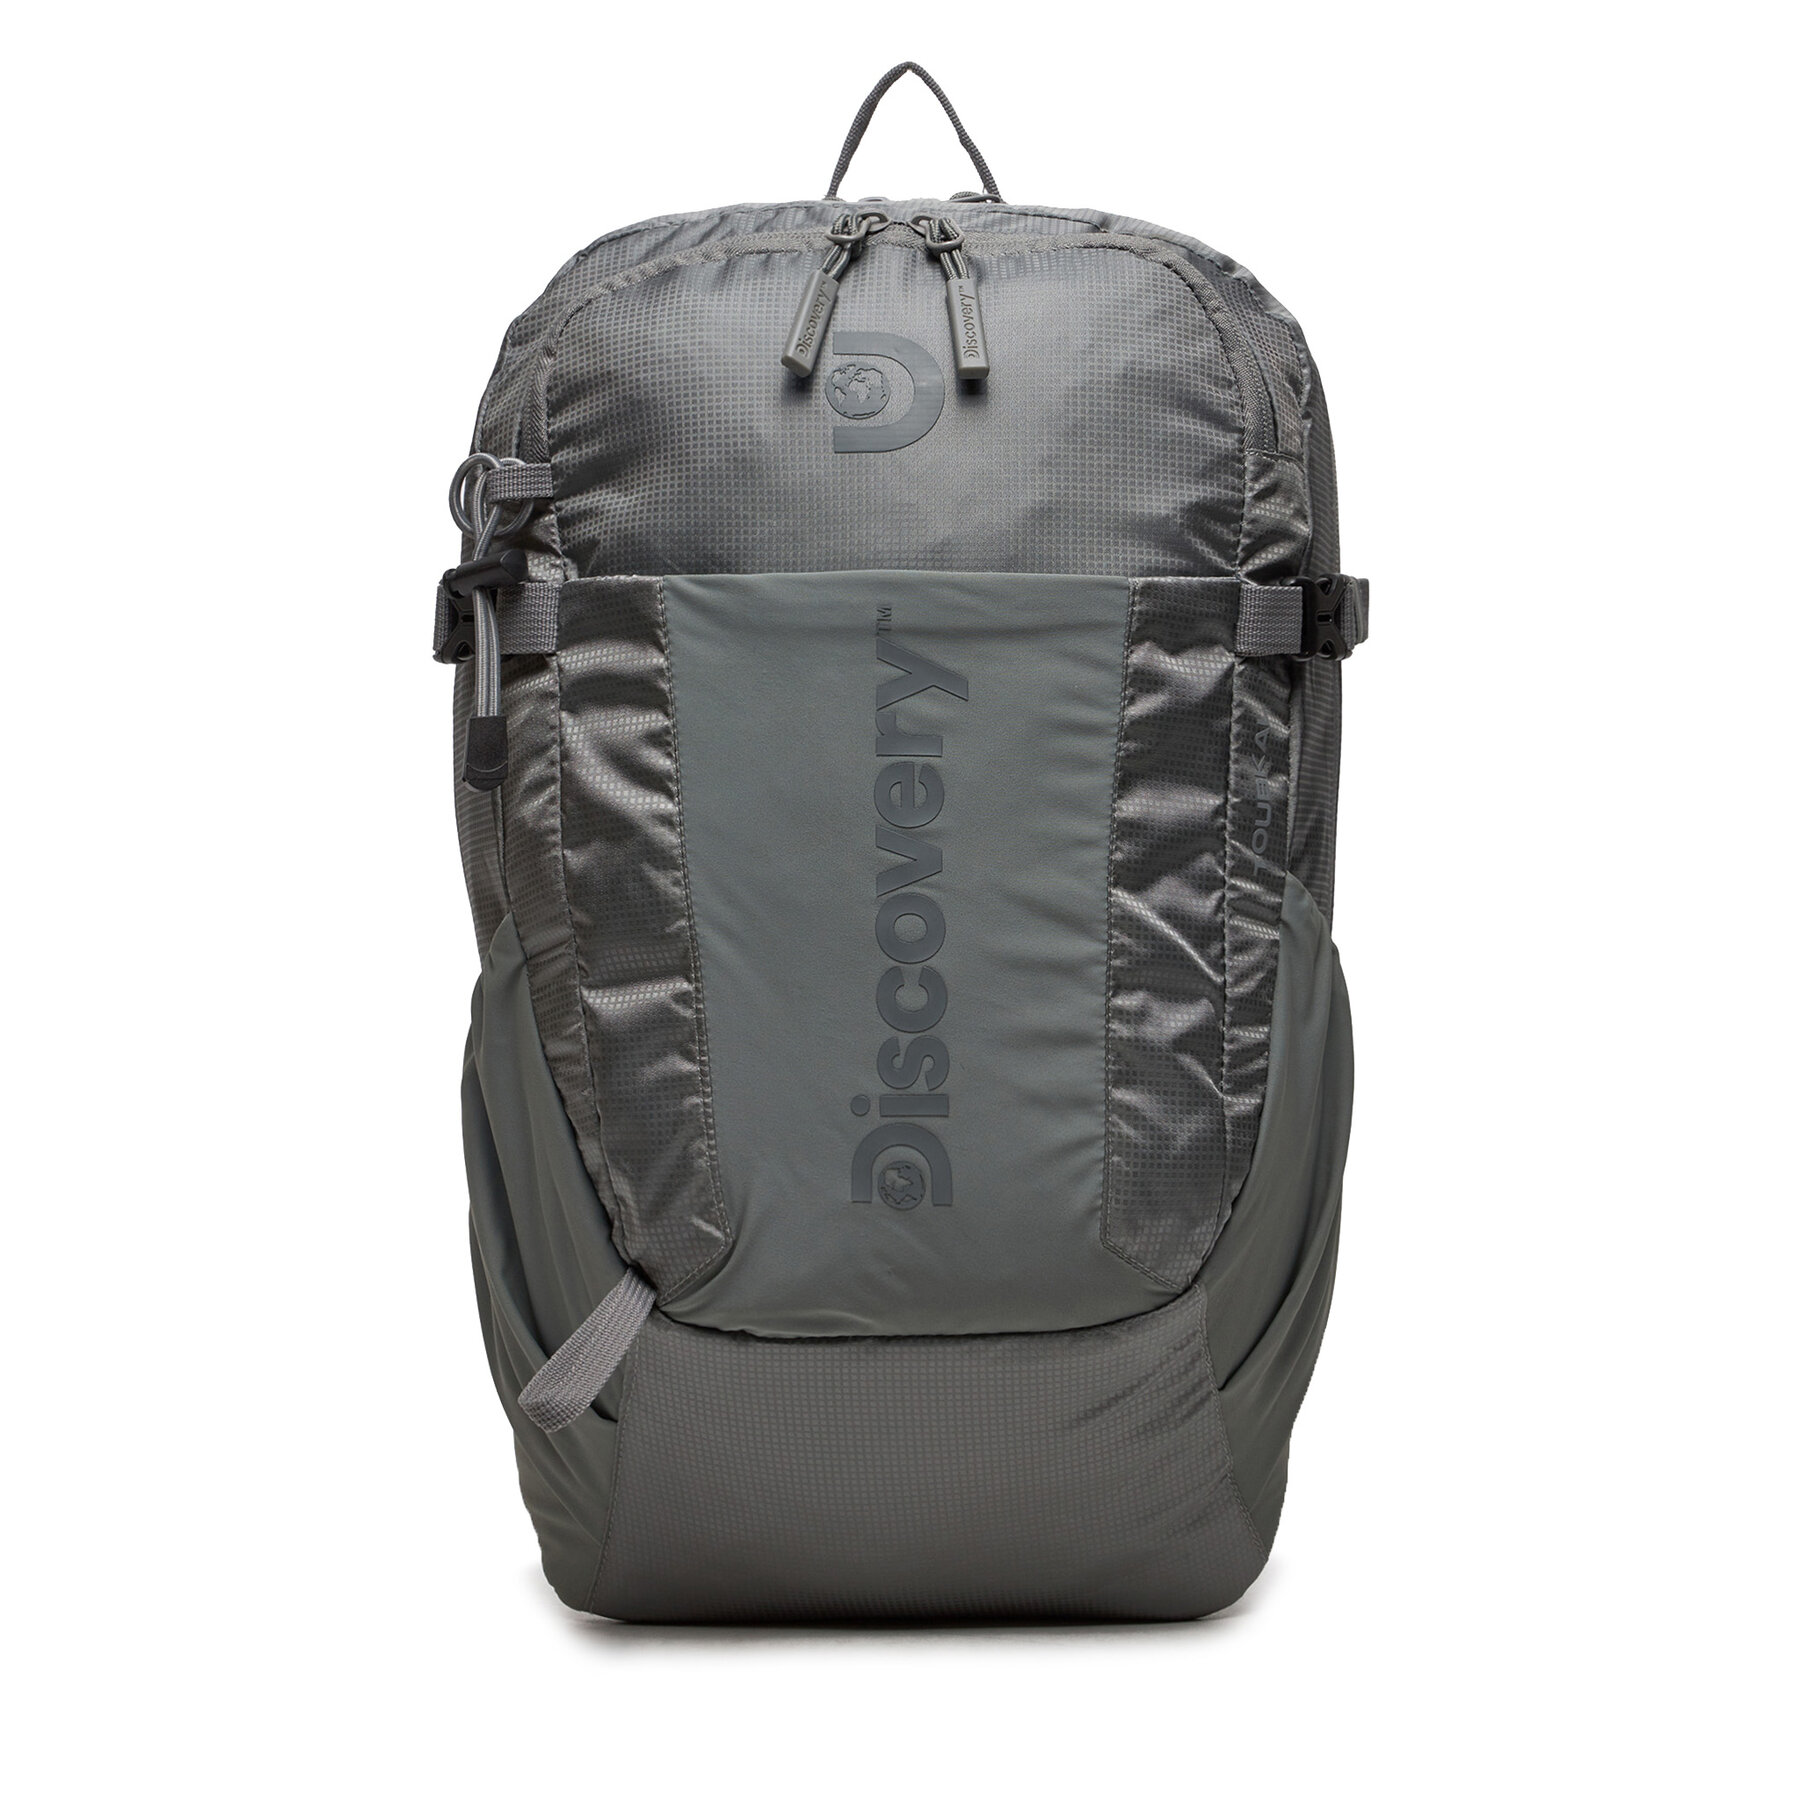 Rucksack Discovery Toubkal 18 D00611.22 Grau von Discovery